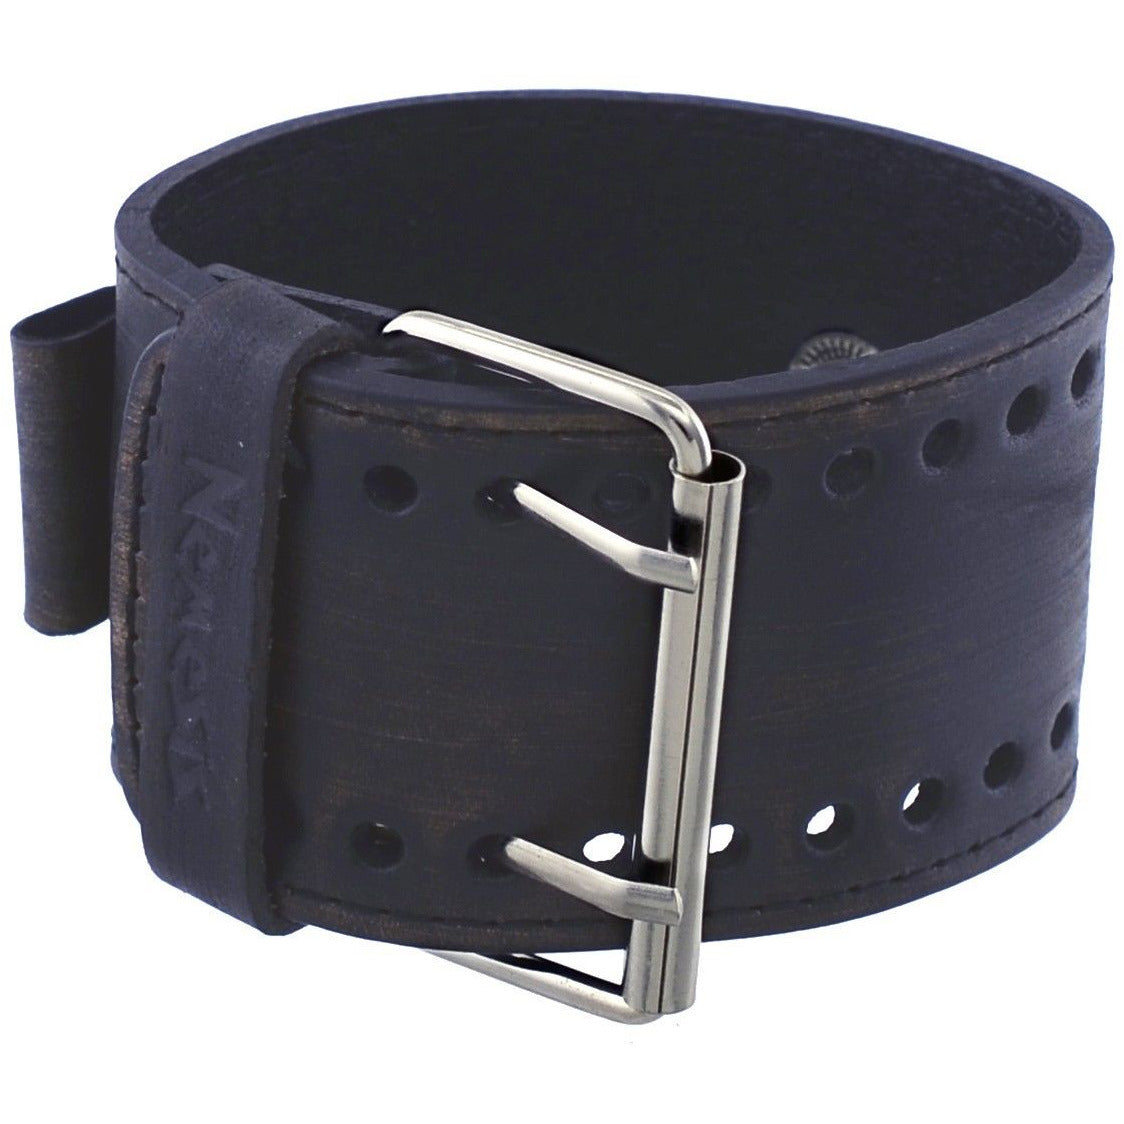 wide watch bands leather